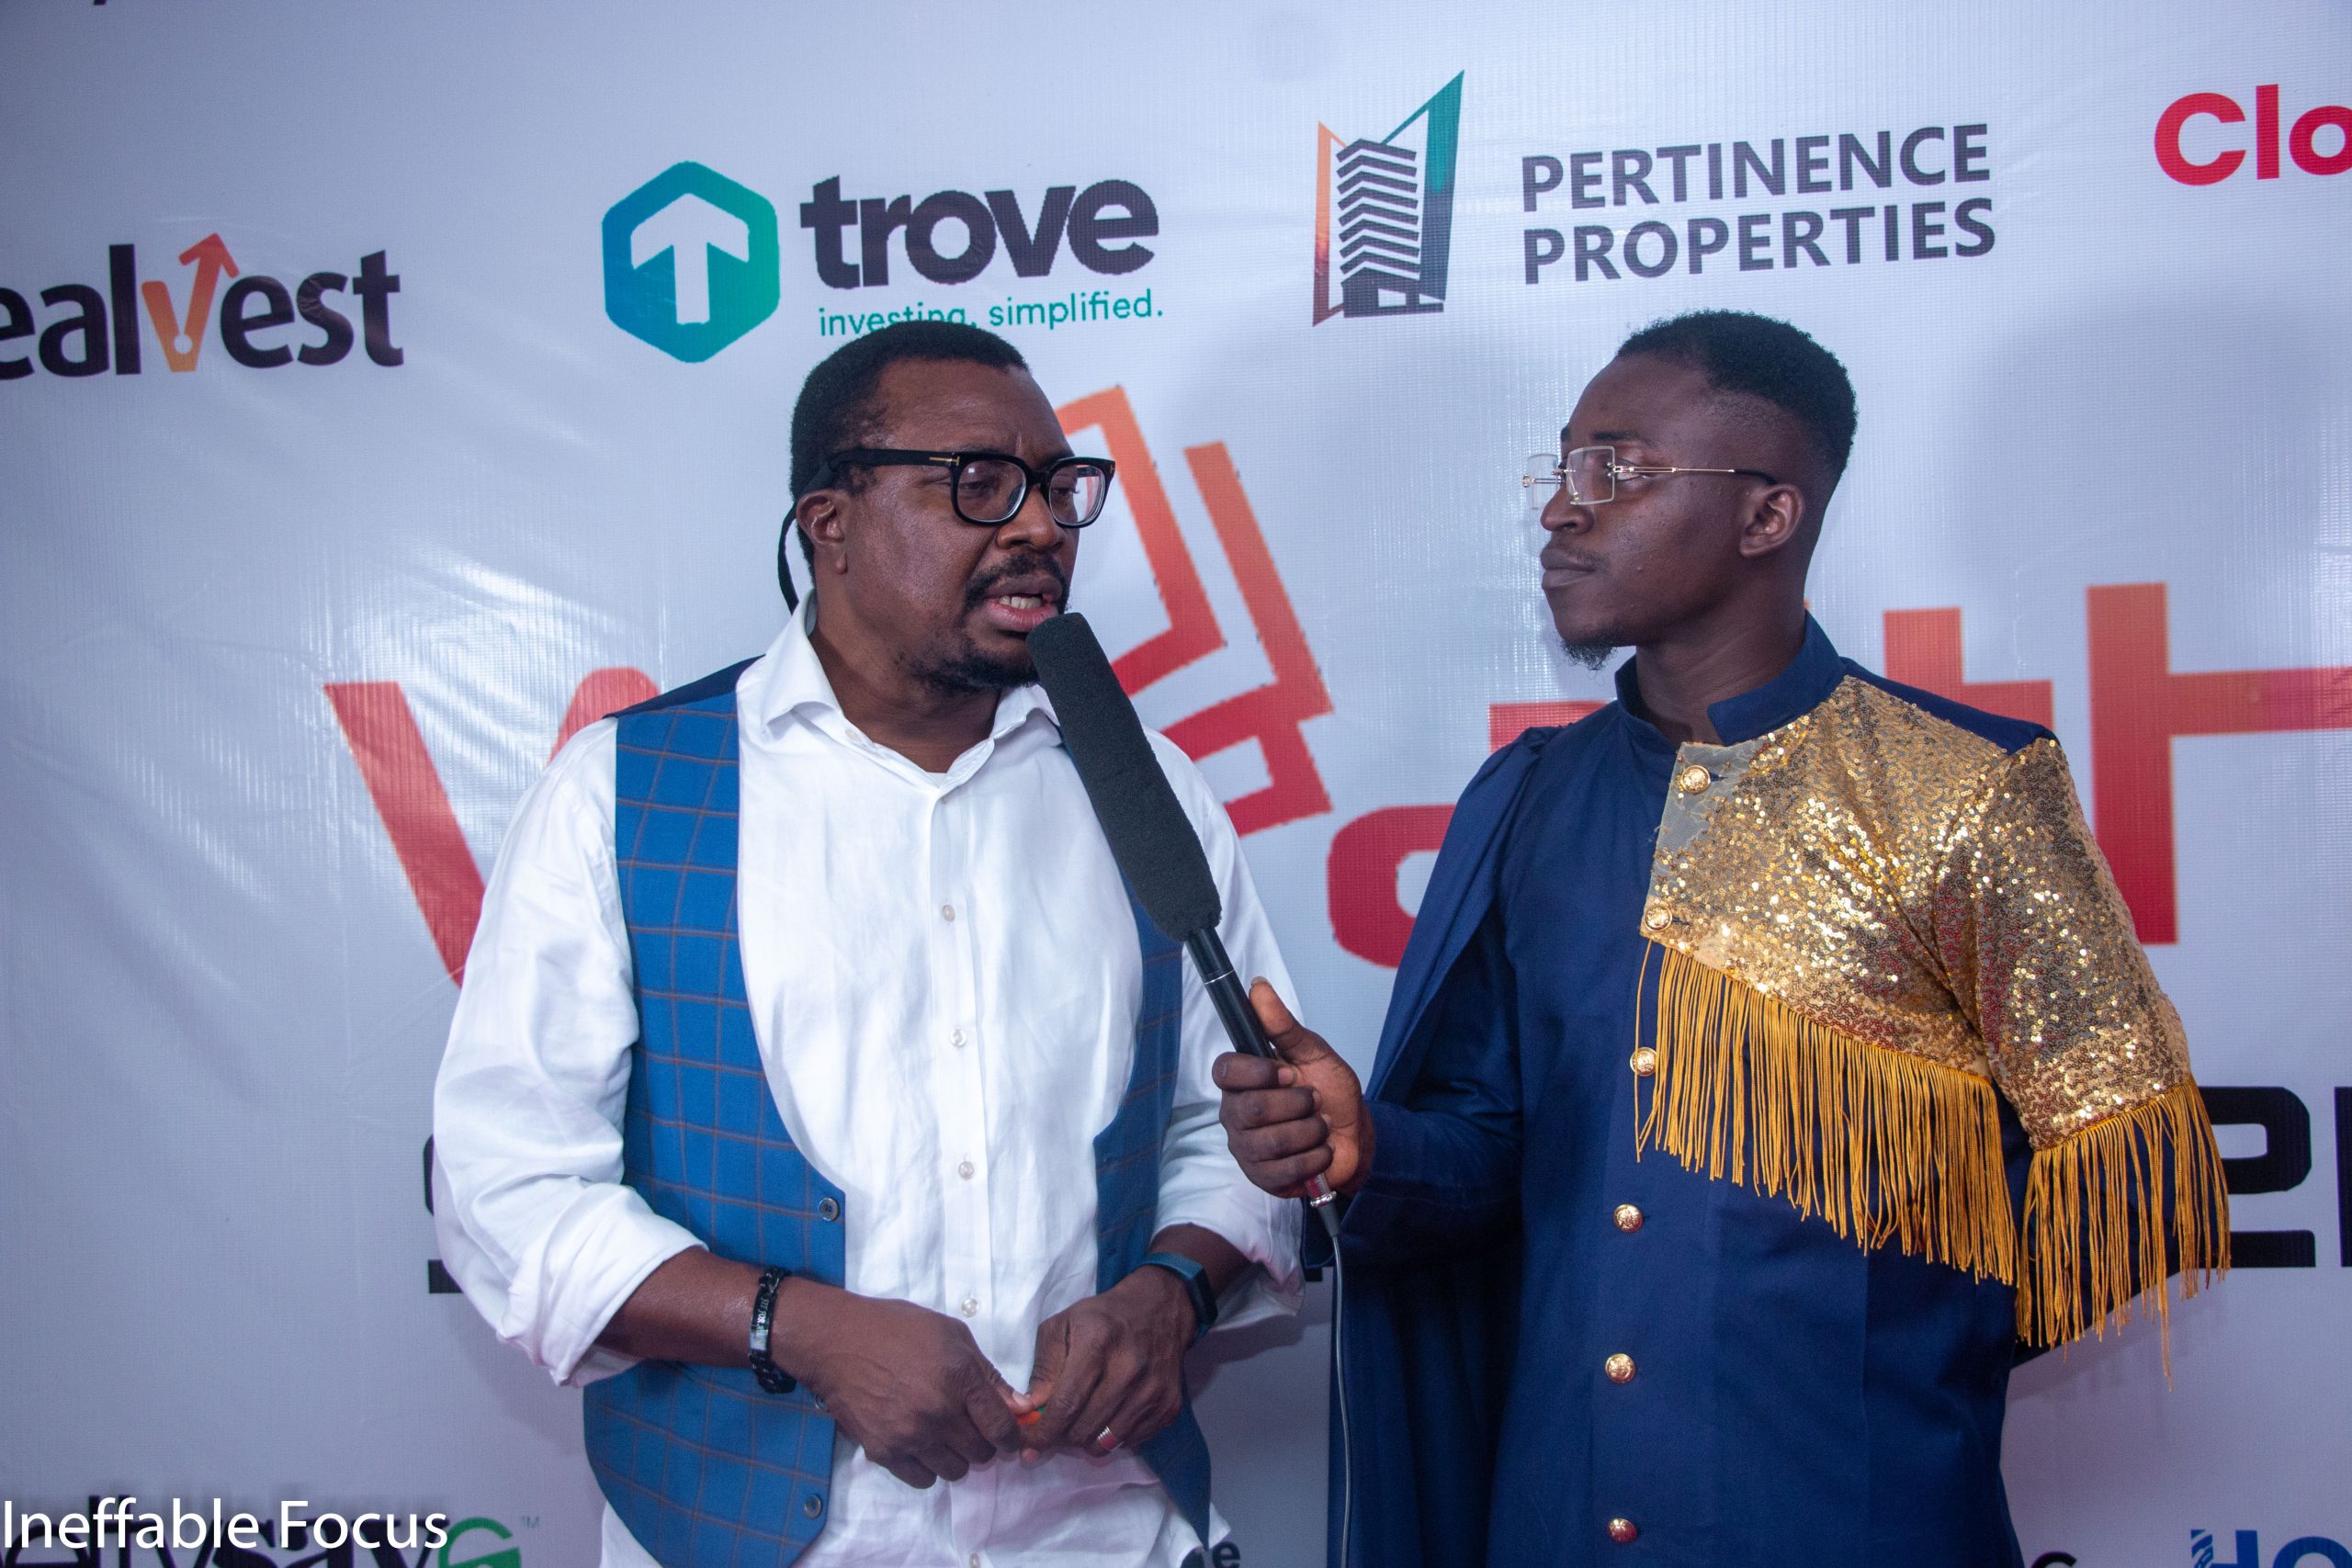 King of comedy Ali Baba on red carpet at conference interview